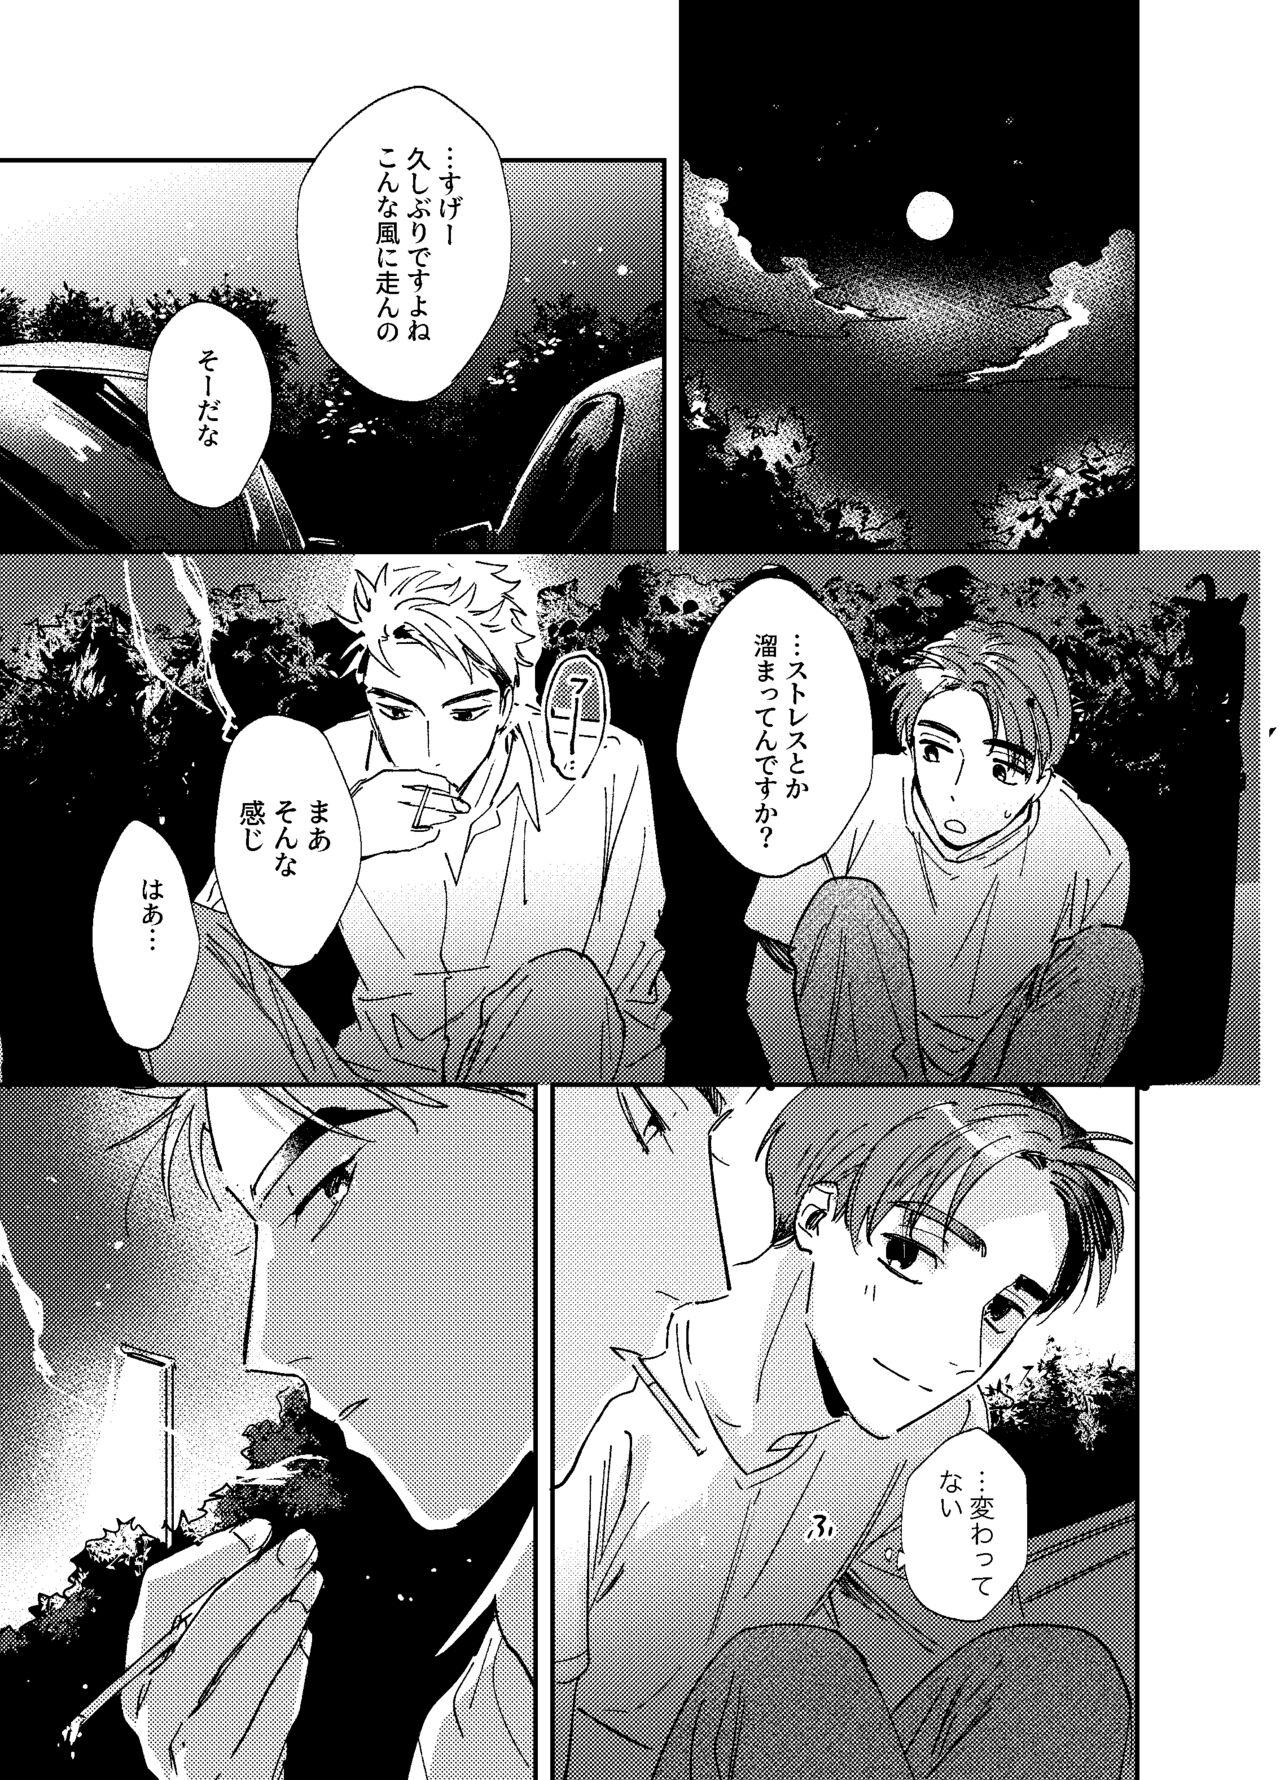 Pov Blow Job more than stars, more than you. - Initial d Infiel - Page 10